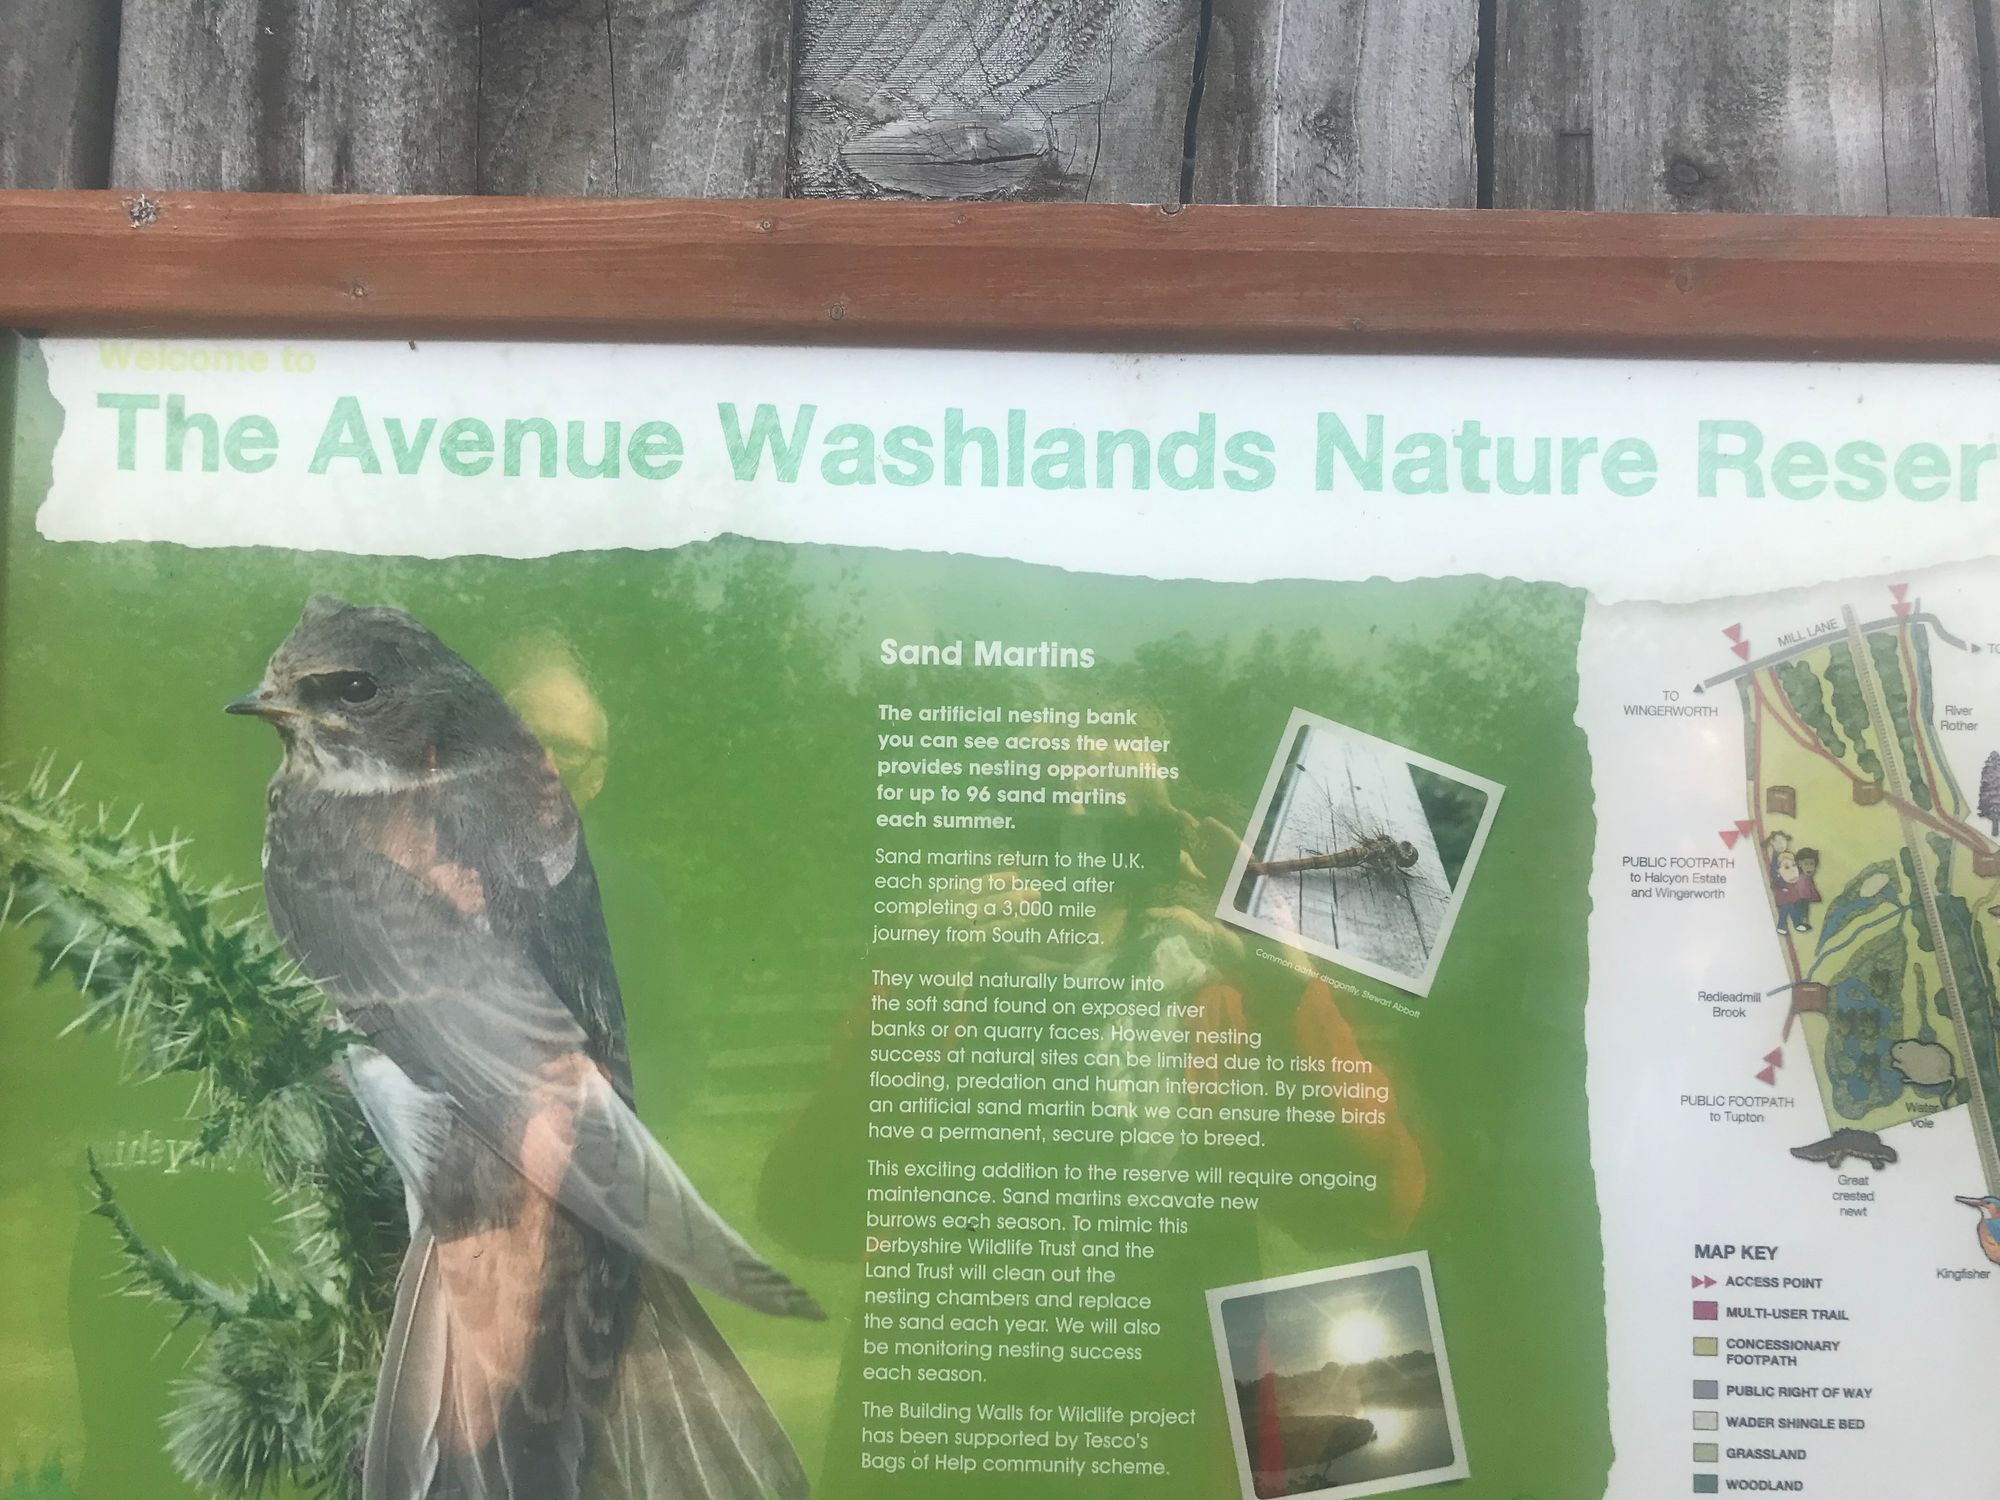 JOIN US - Family Fun Day 30th July - The Avenue Washlands Nature Reserve, Chesterfield